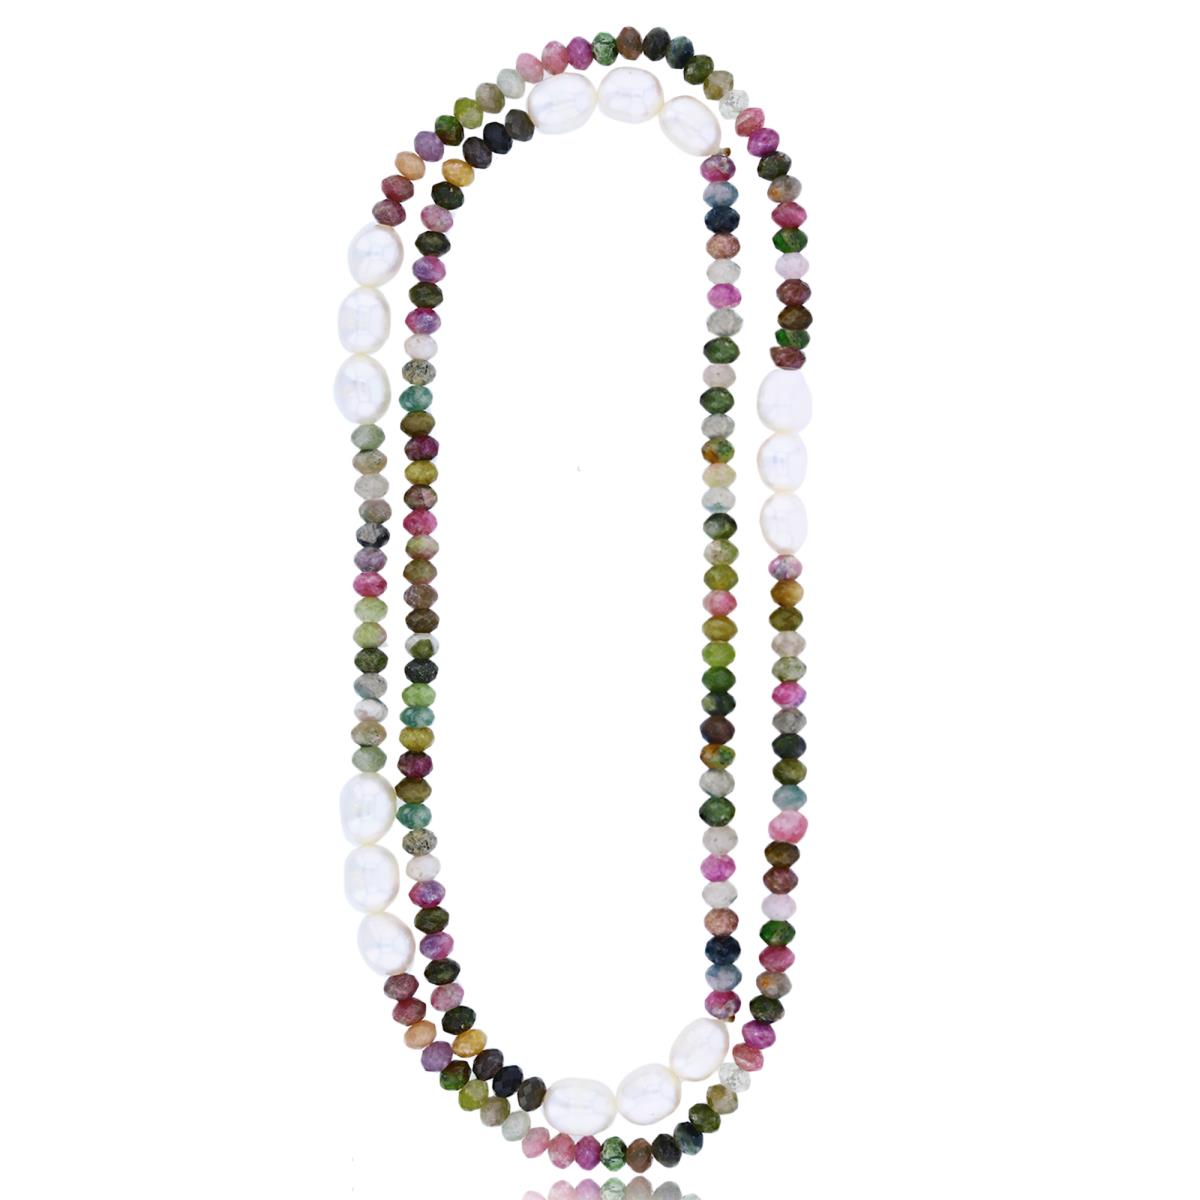 7-8mm Oval FWP & 4x5mm Tourmaline 36" Necklace